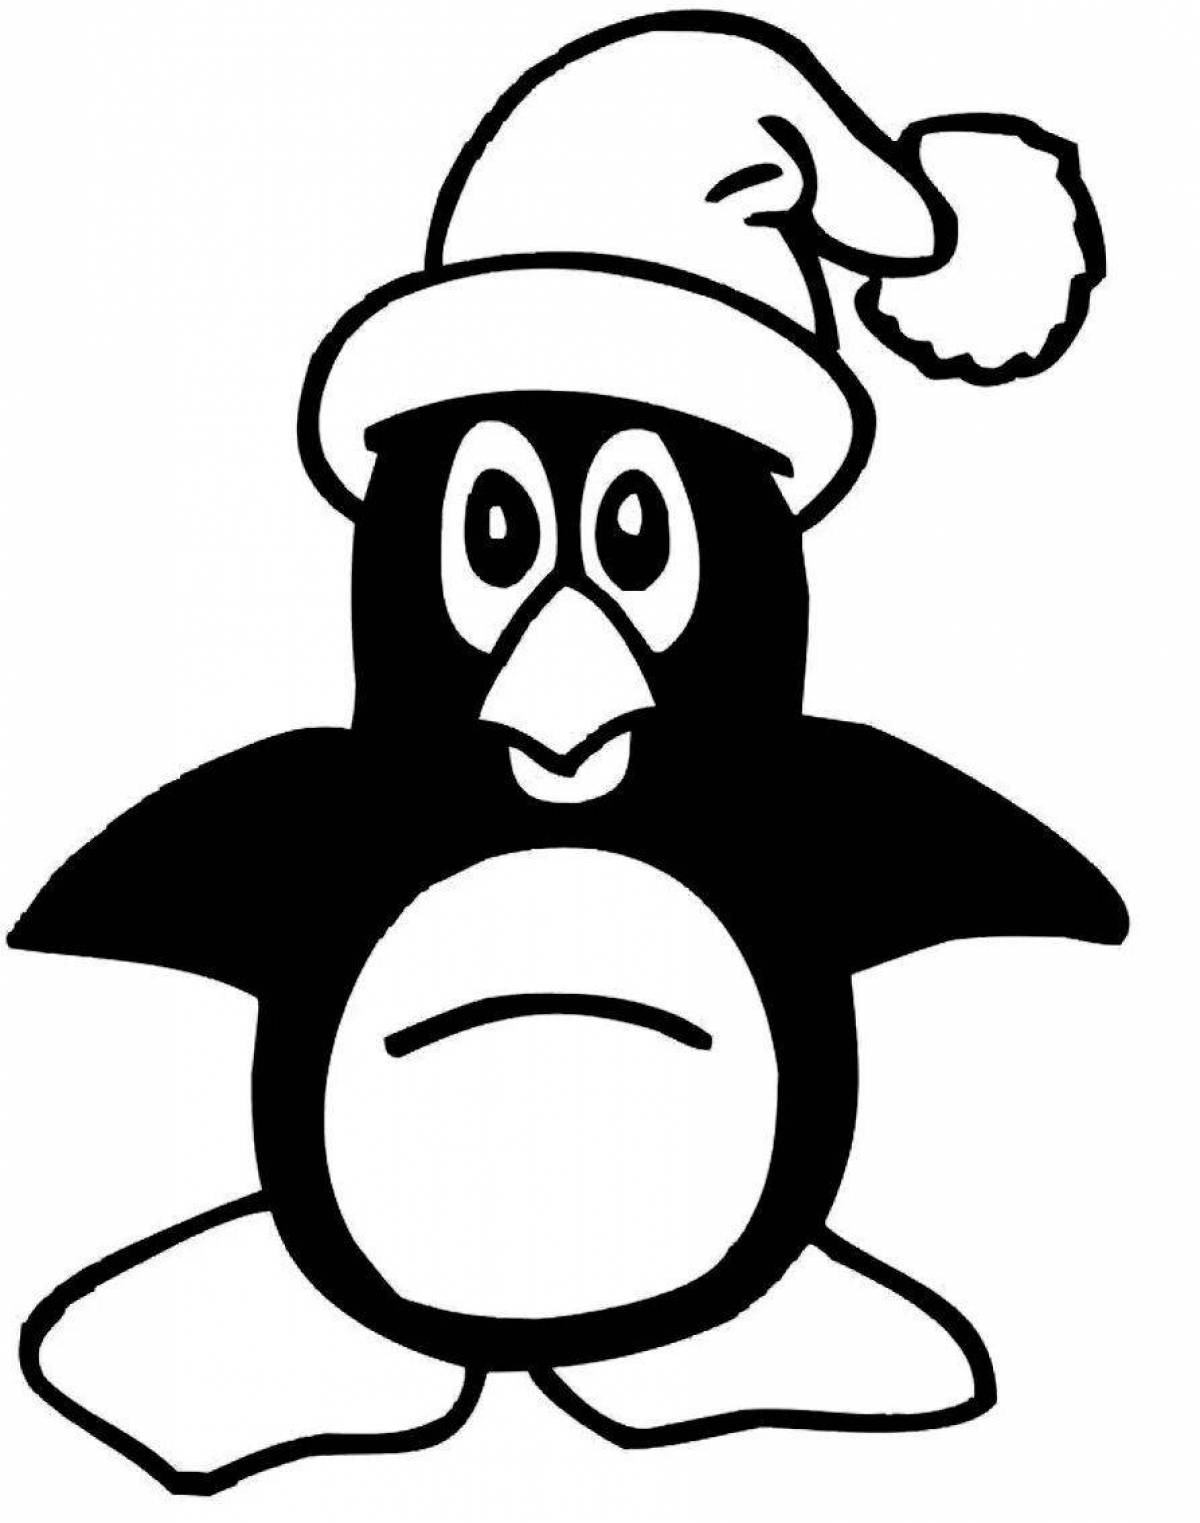 Attractive drawing of a penguin